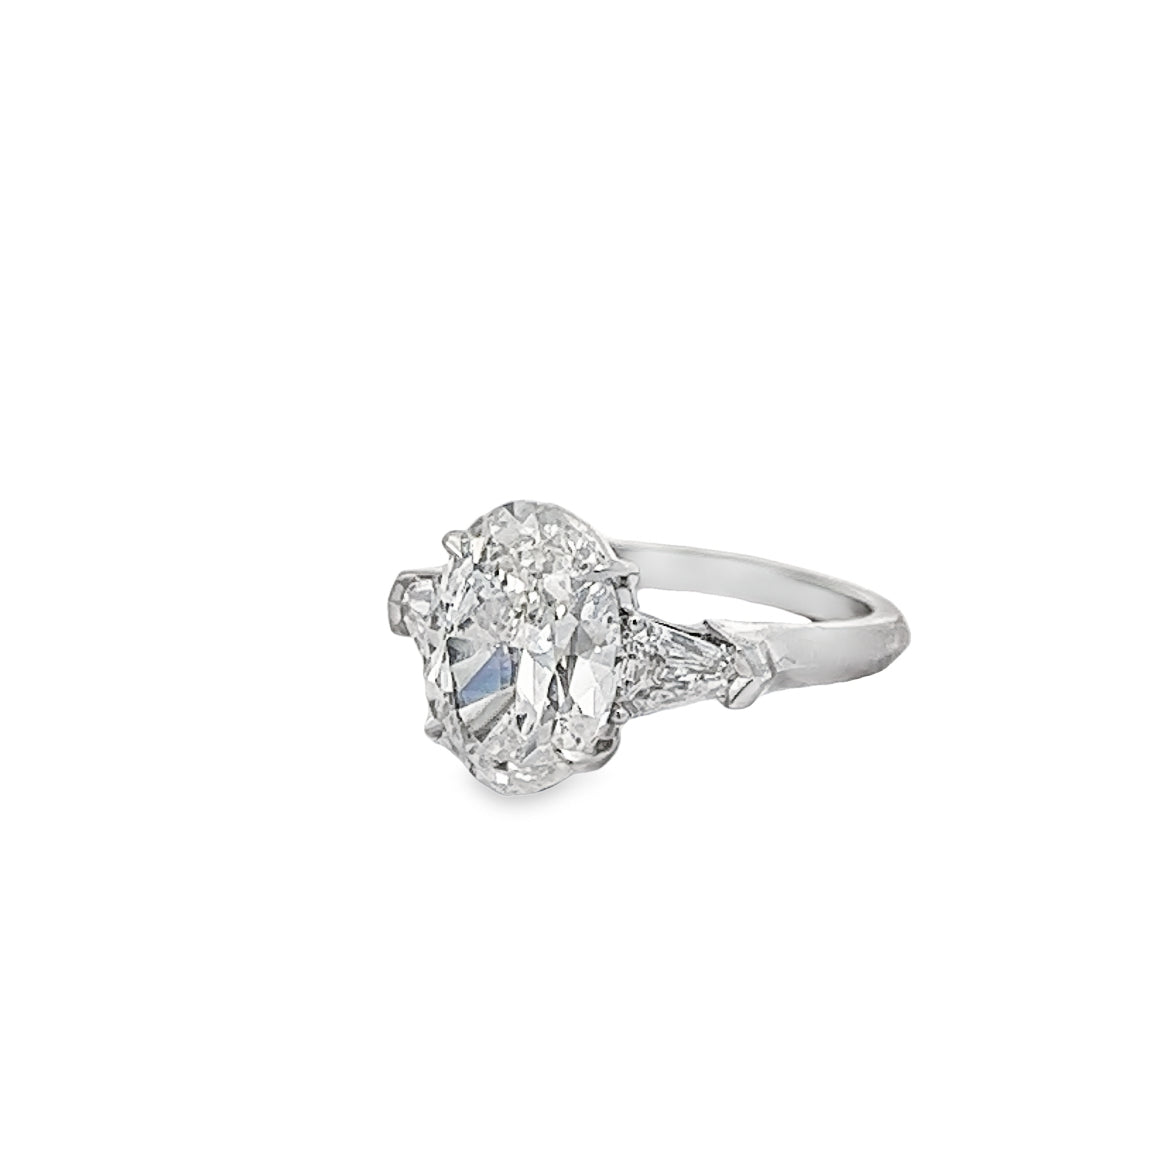 The Classic 3 Platinum Oval Engagement Ring with Trillion Side Stones